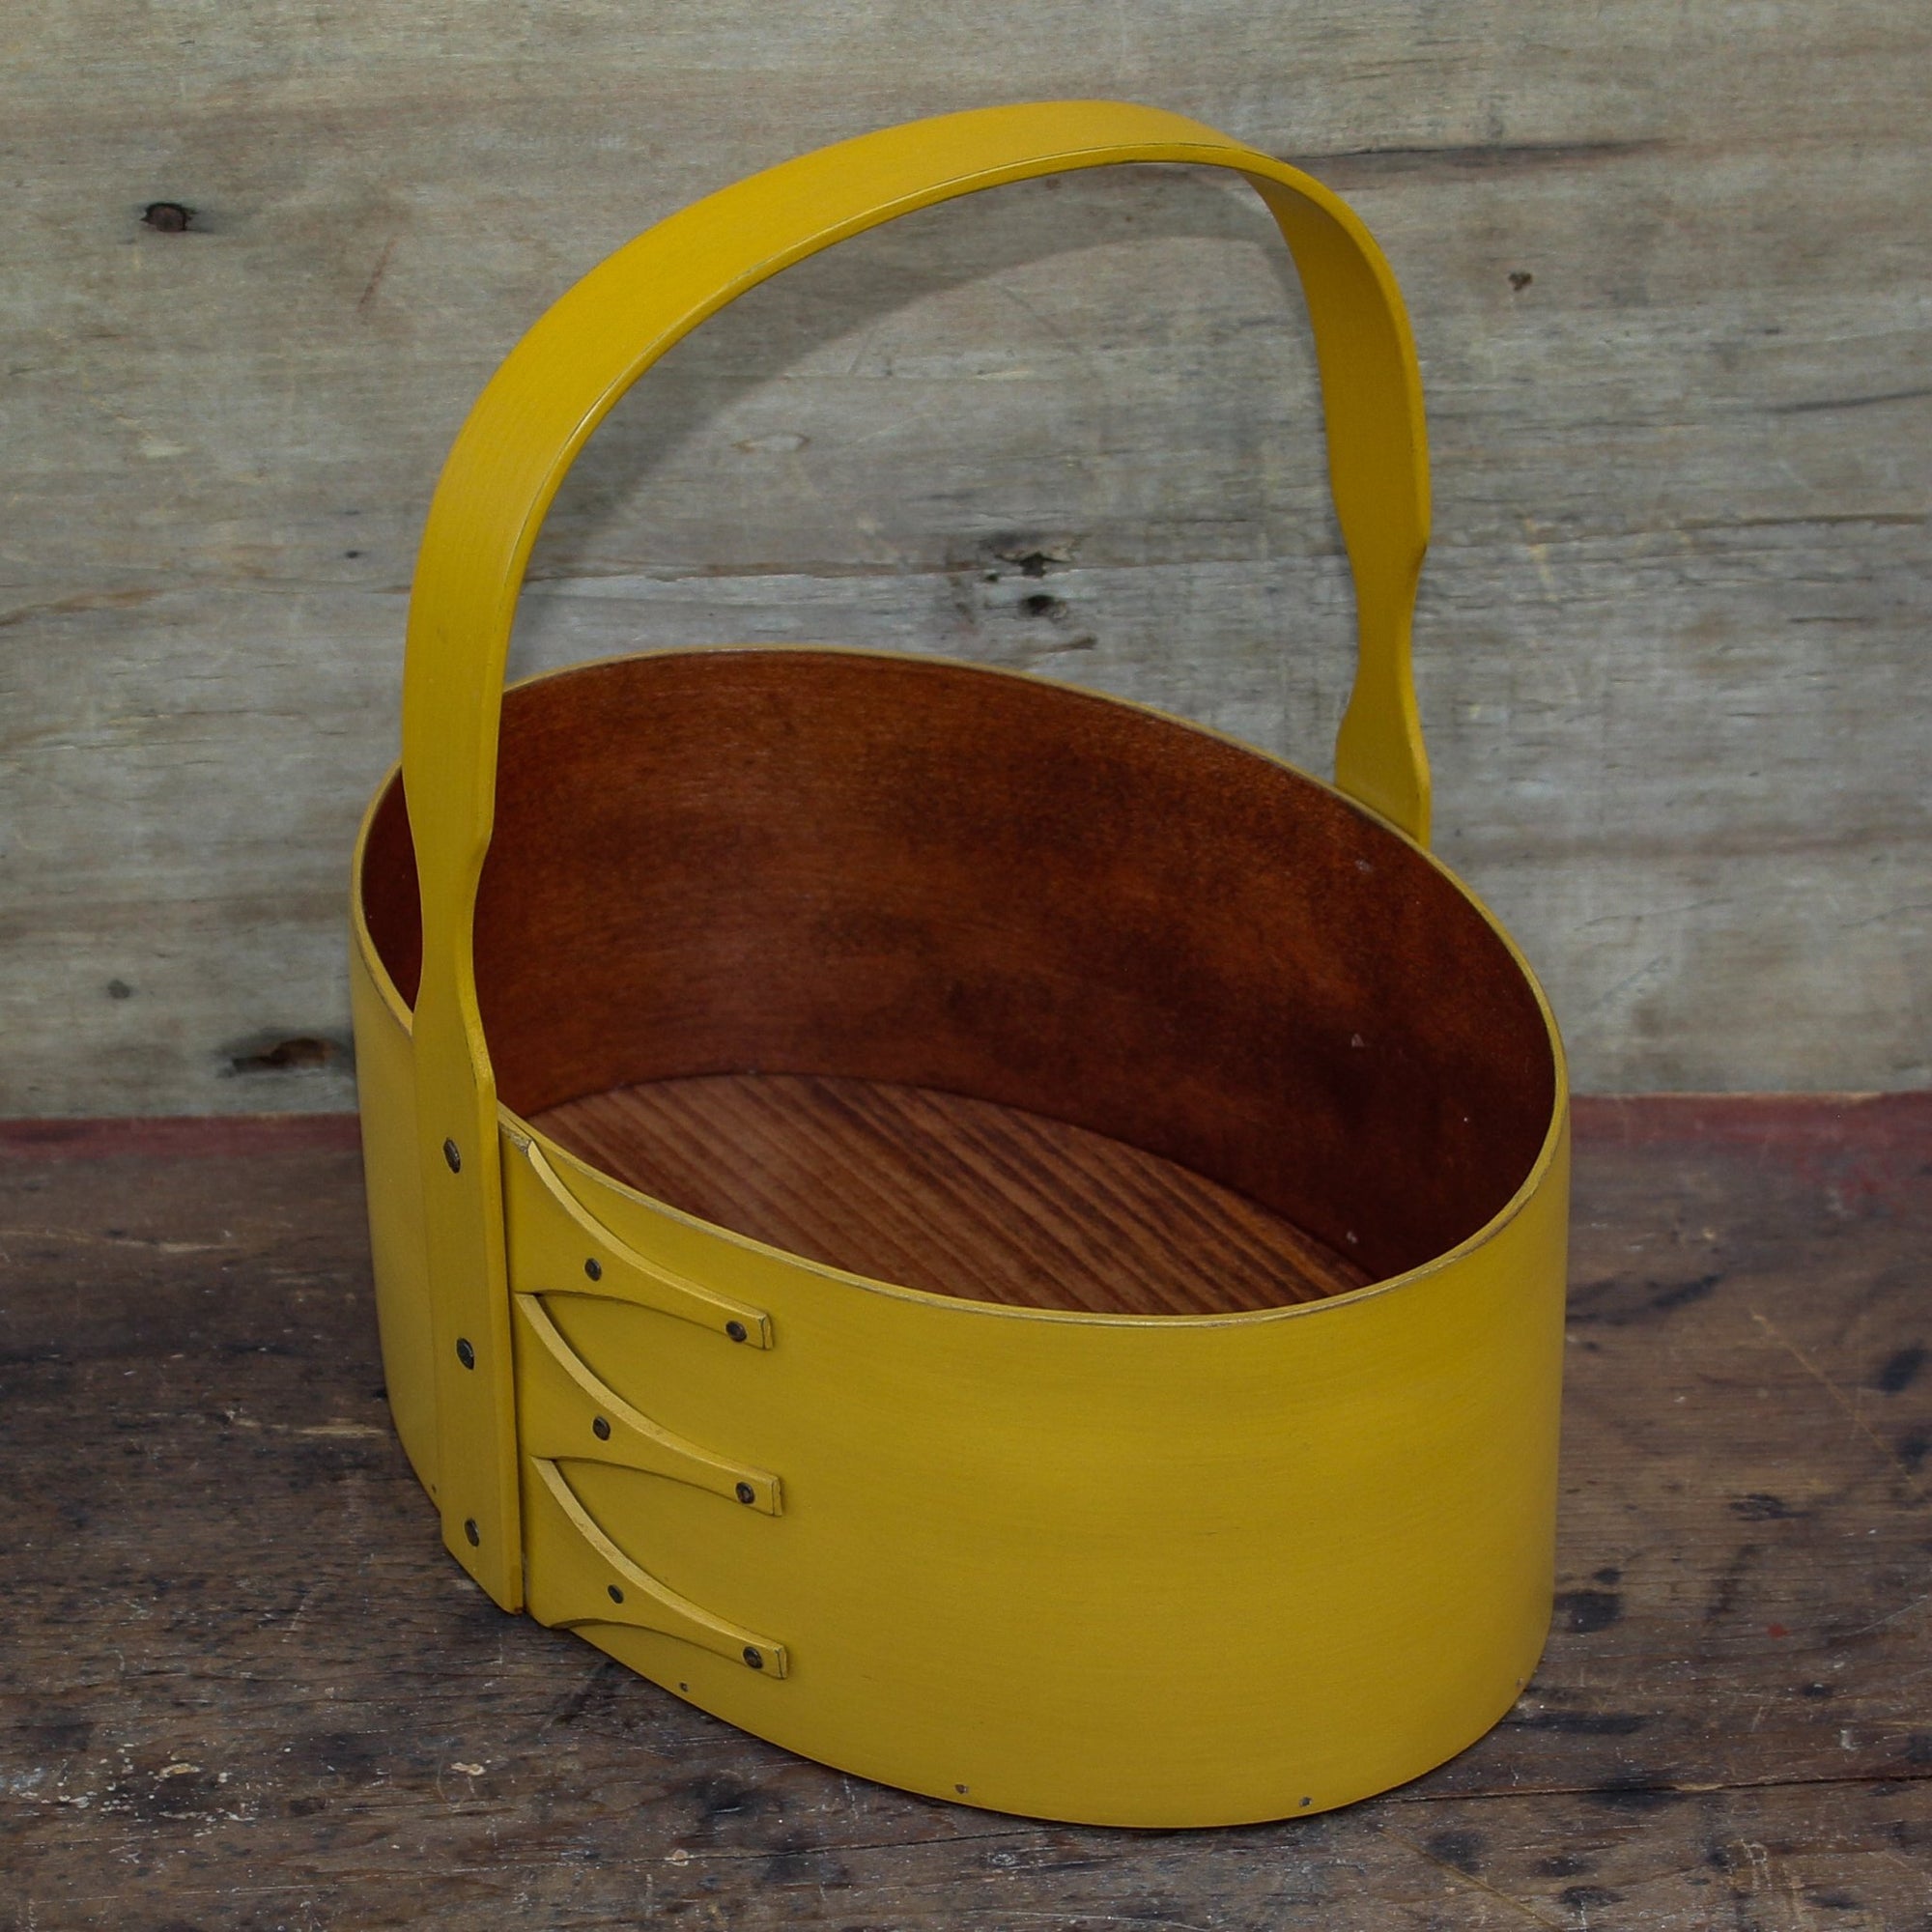 Shaker Carrier, Size #4, LeHays Shaker Boxes, Handcrafted in Maine, Yellow Milk Paint Finish, Side View